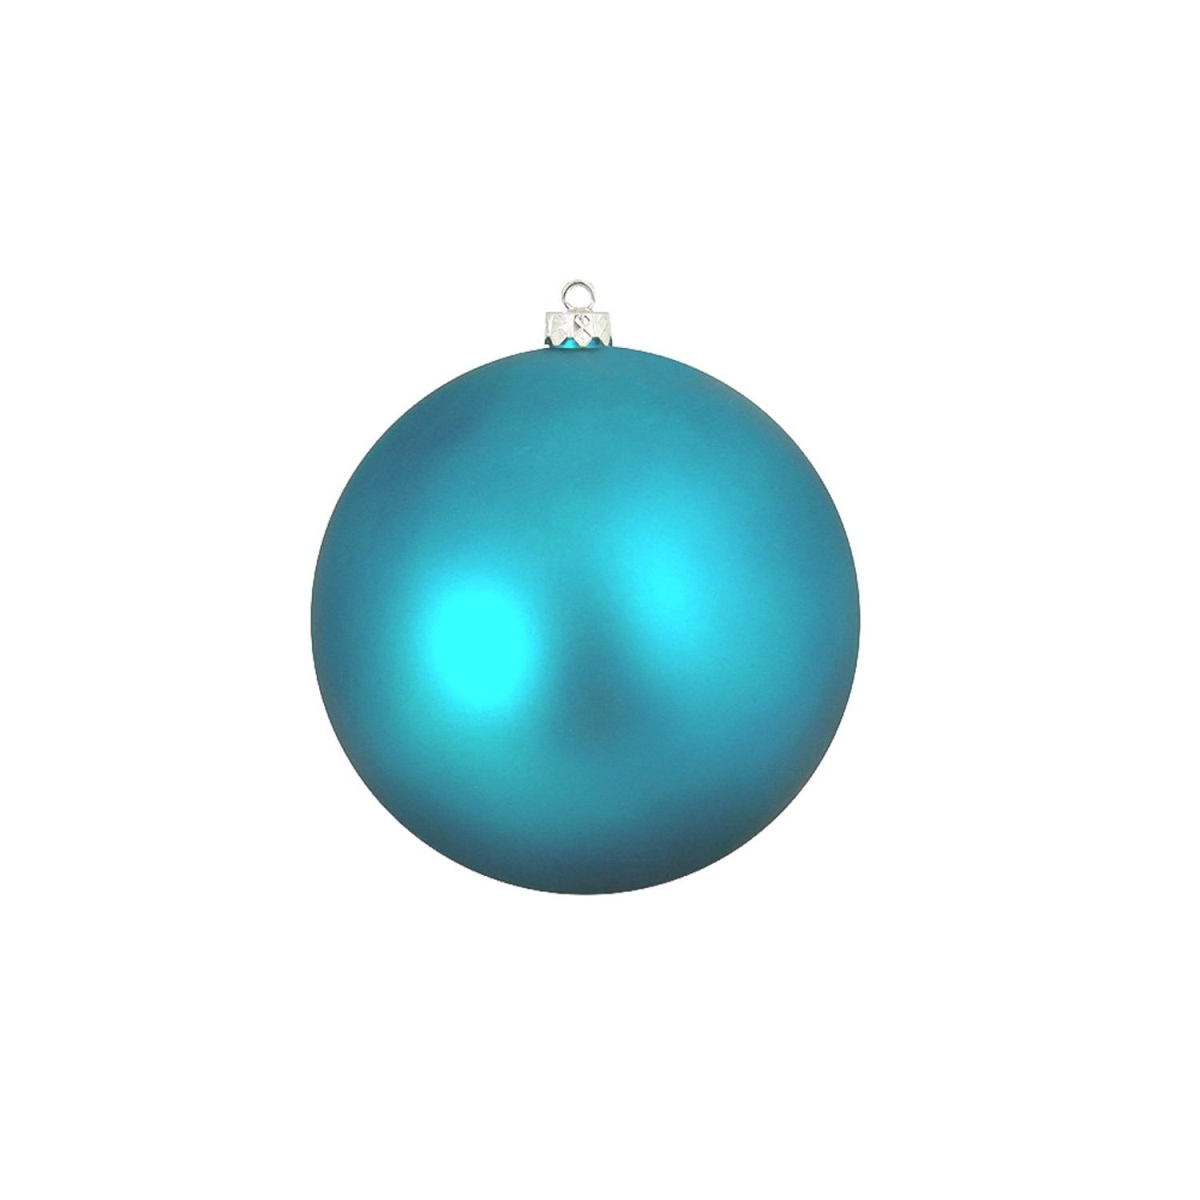 Northlight 31756432 4 in. Shatterproof UV Resistant Commercial Christmas Ball Ornament, Matte & Turquoise Blue